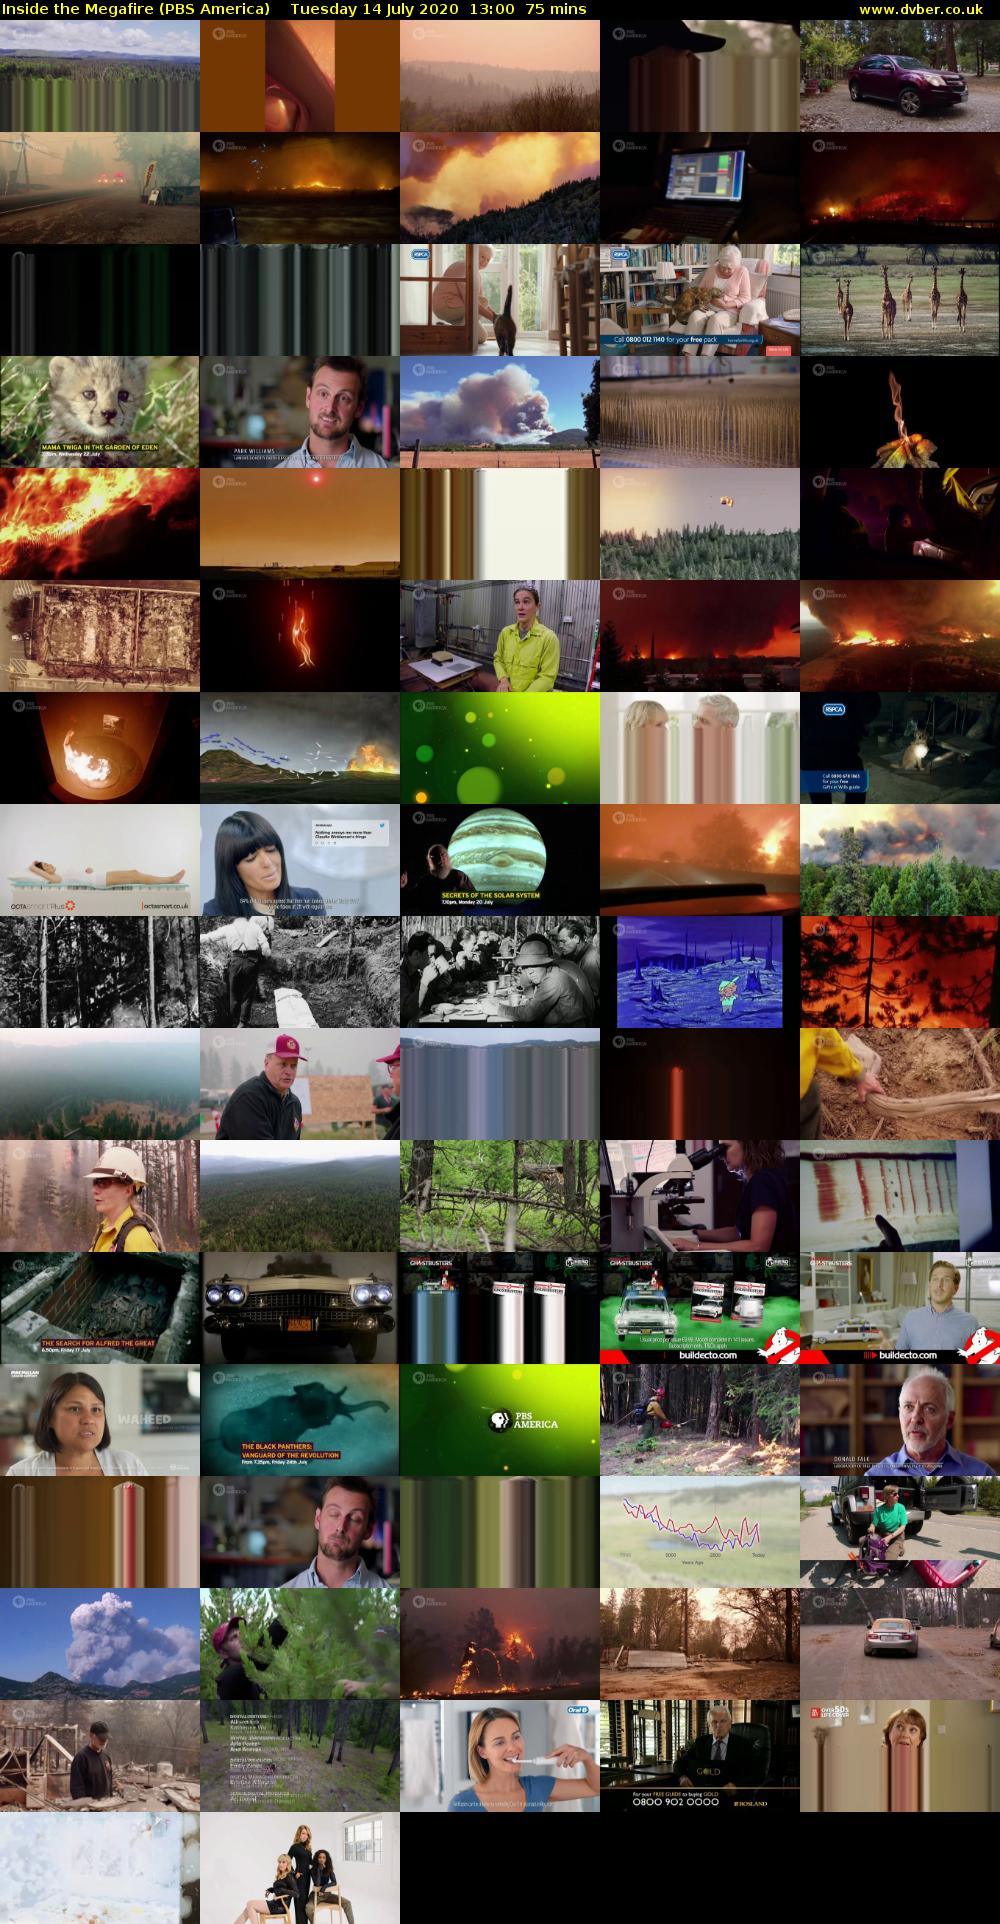 Inside the Megafire (PBS America) Tuesday 14 July 2020 13:00 - 14:15